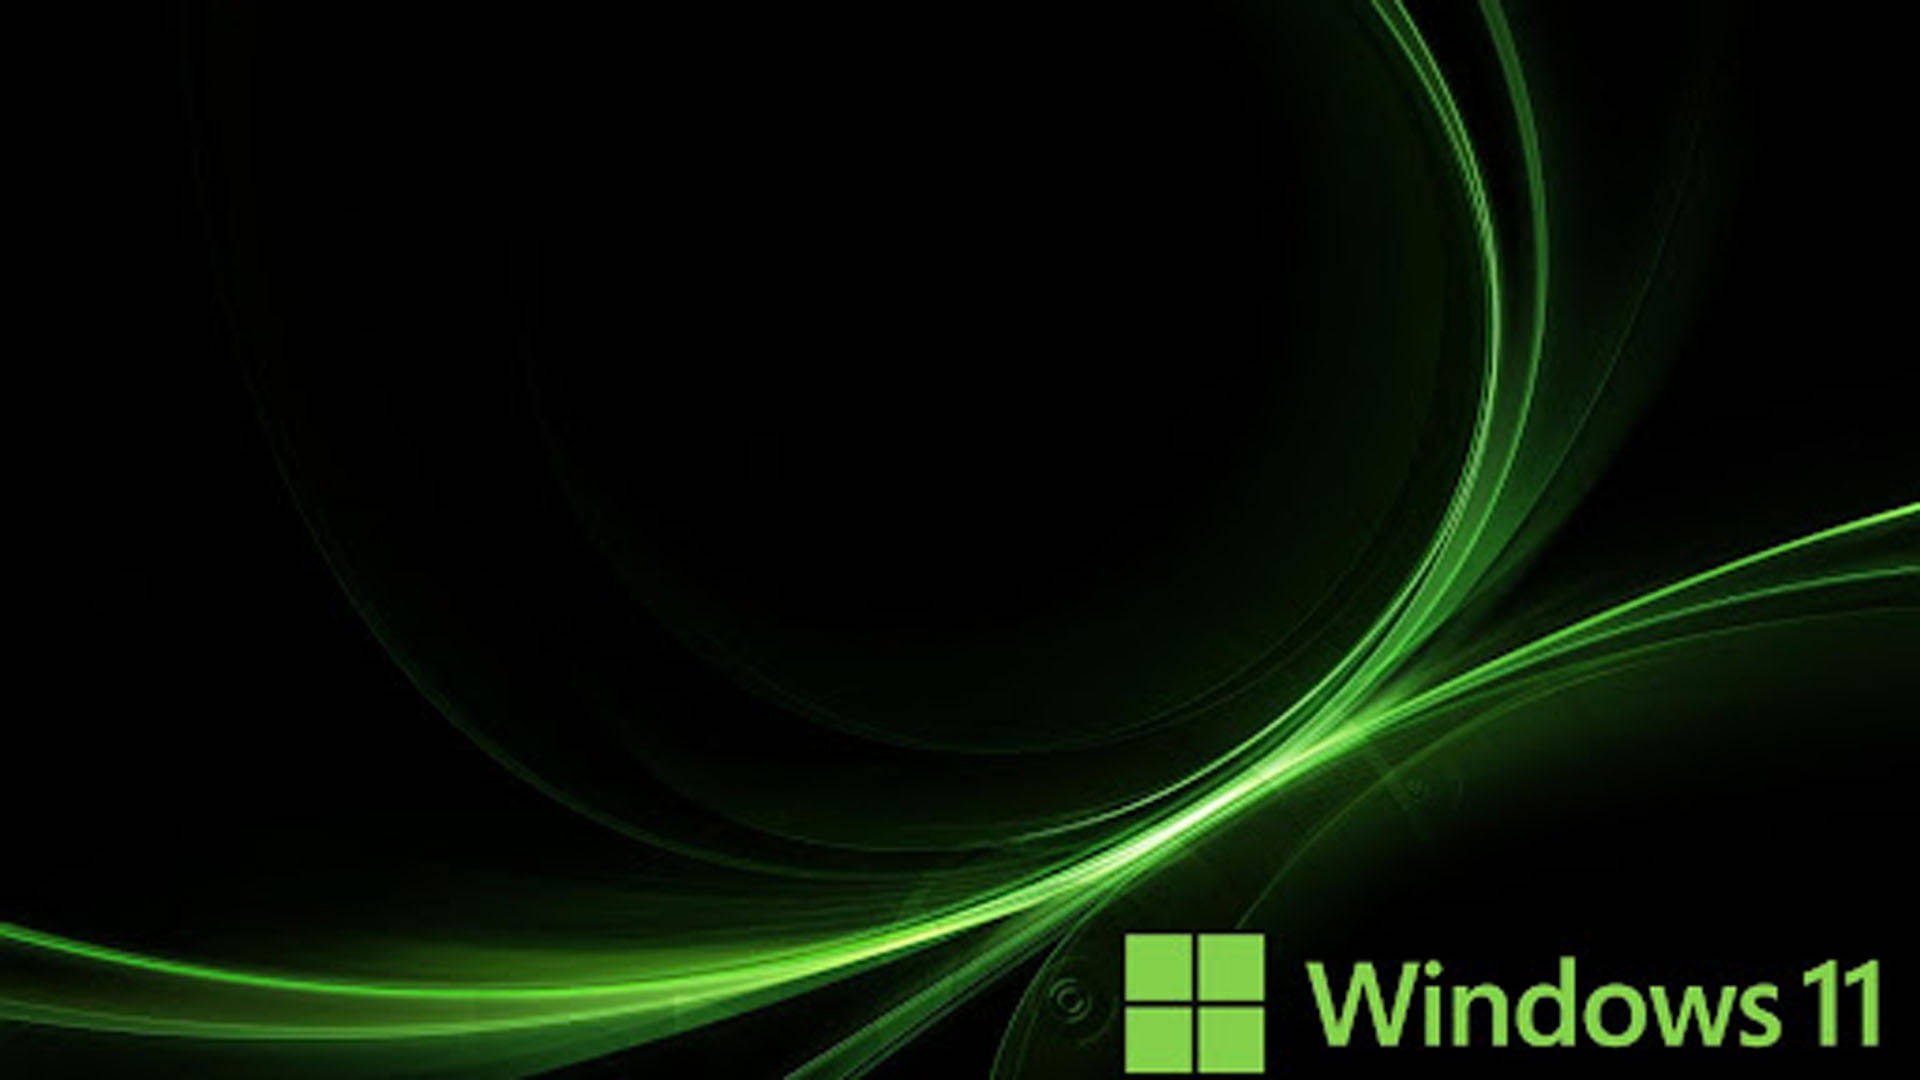 Black And Green Windows 11 Curves Background